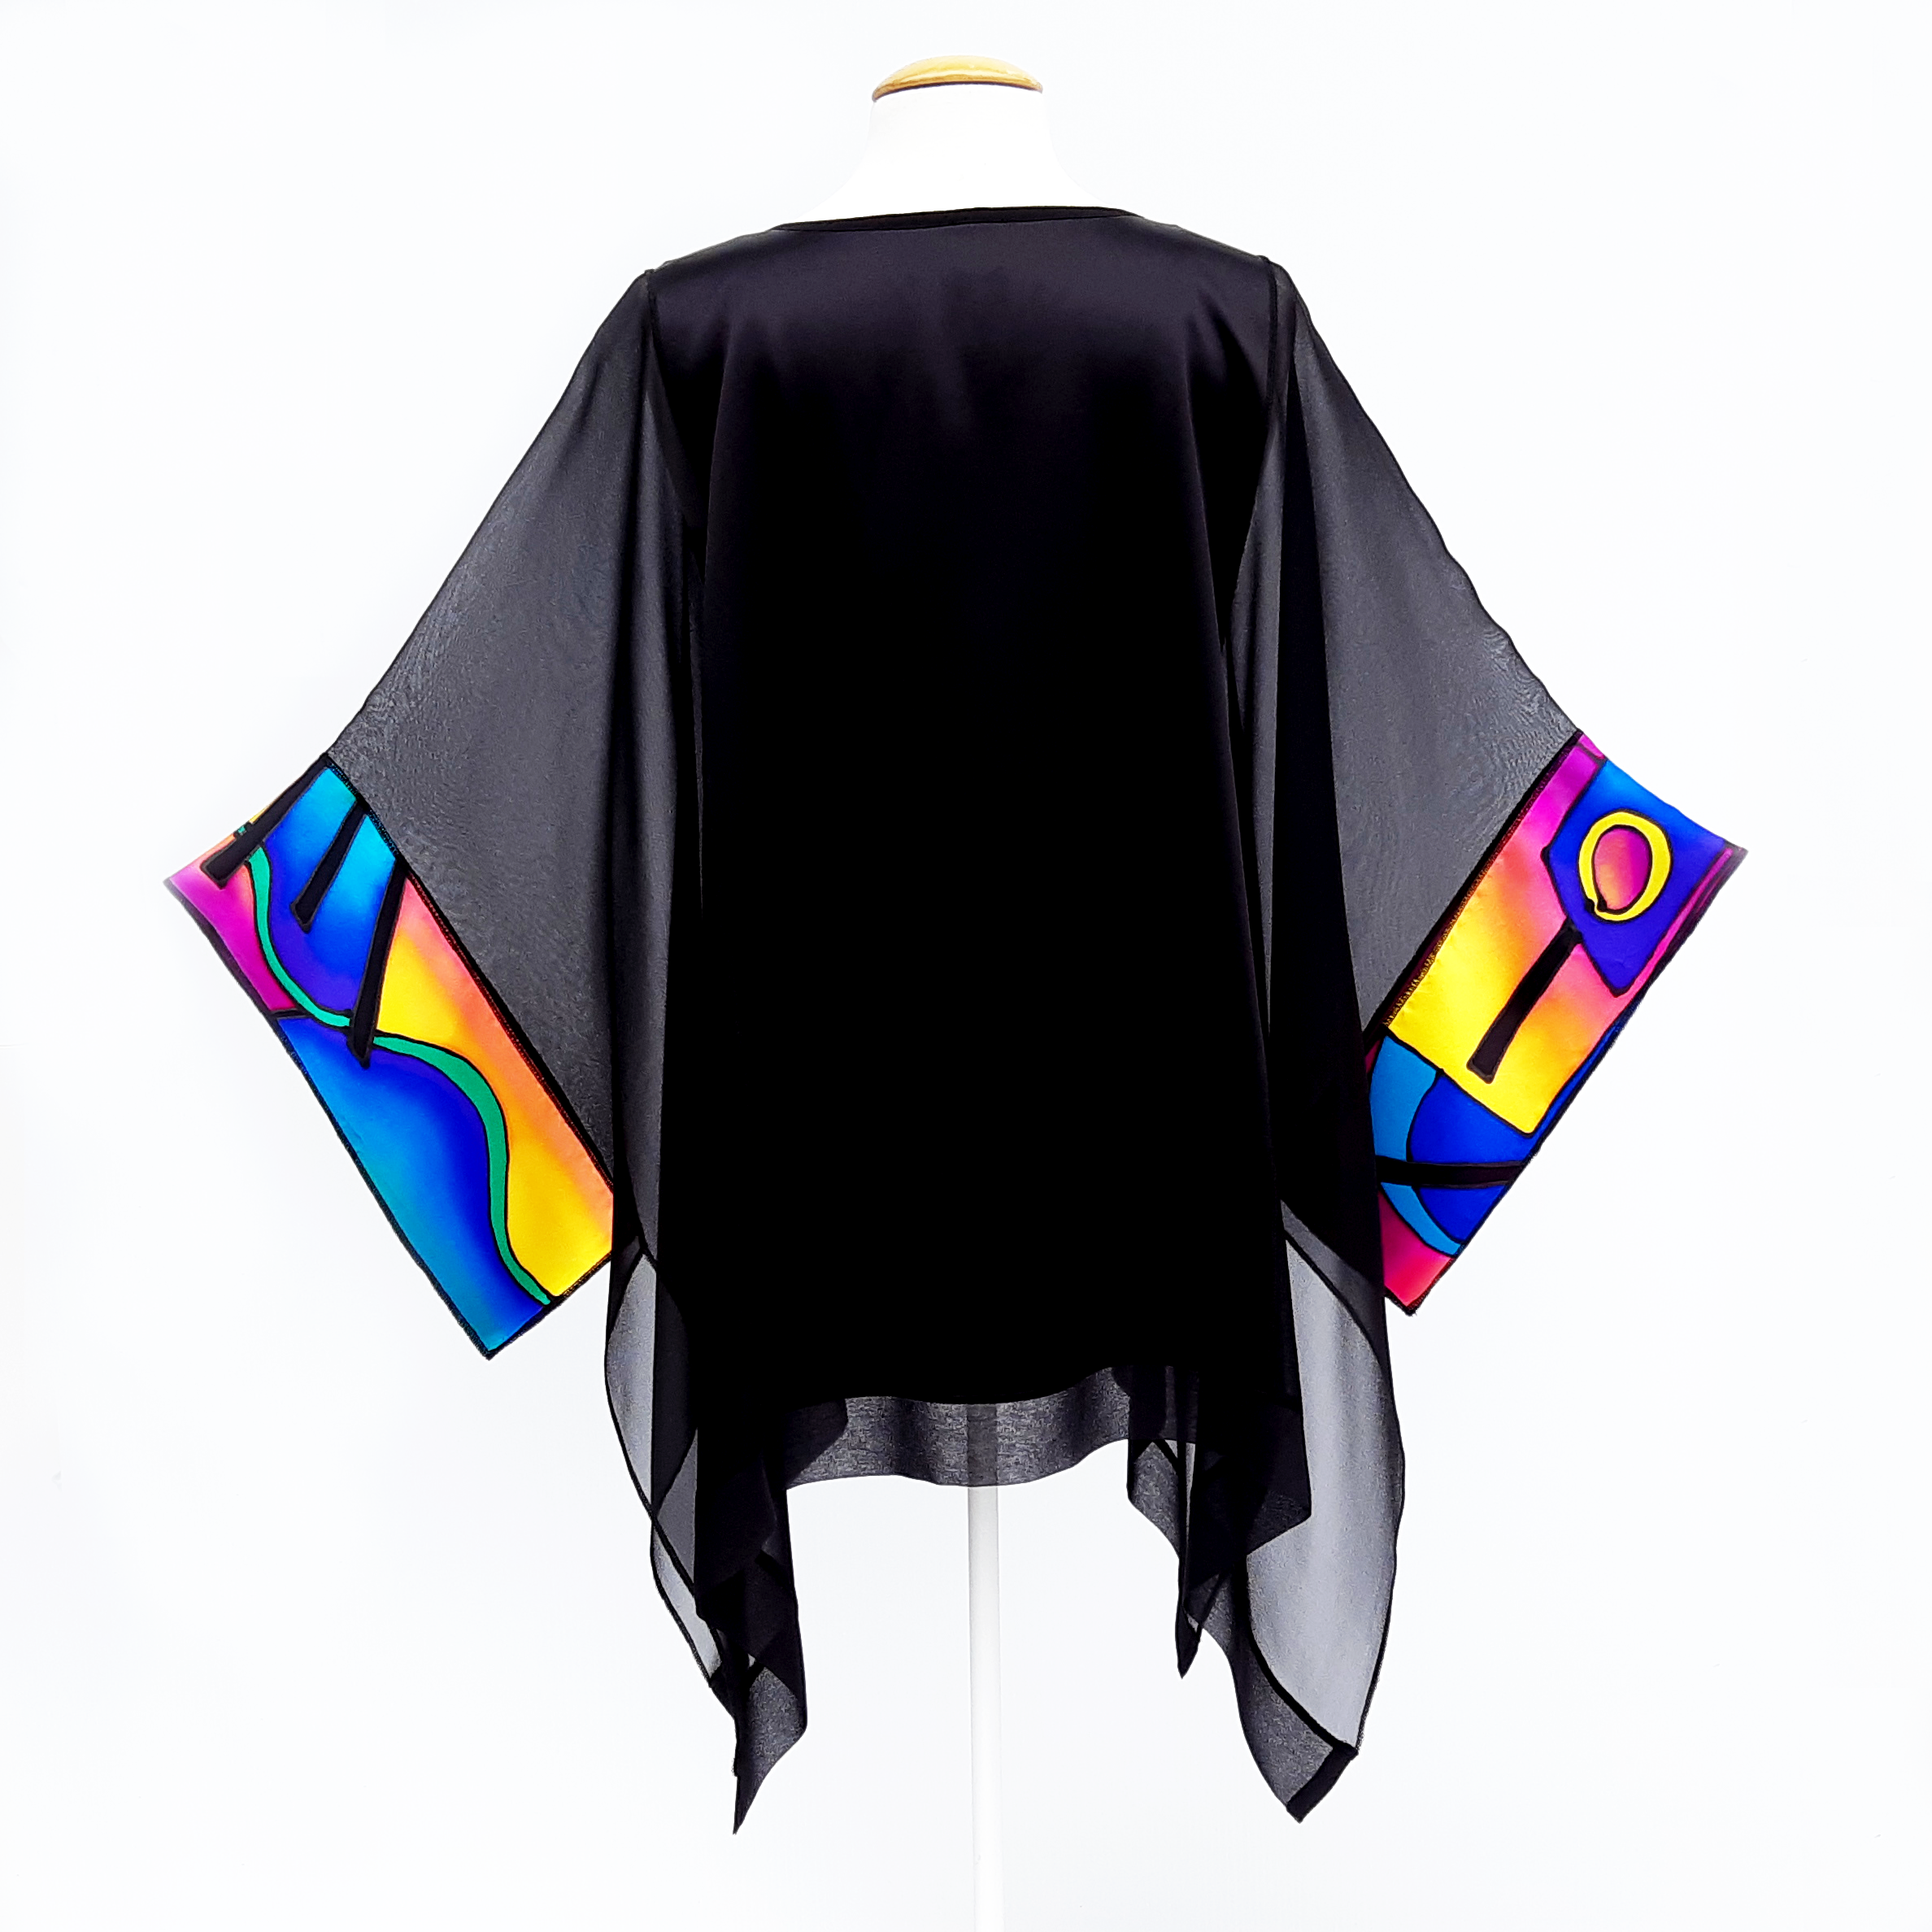 Plus size caftan top black silk for weddings and cruise wear made in Canada